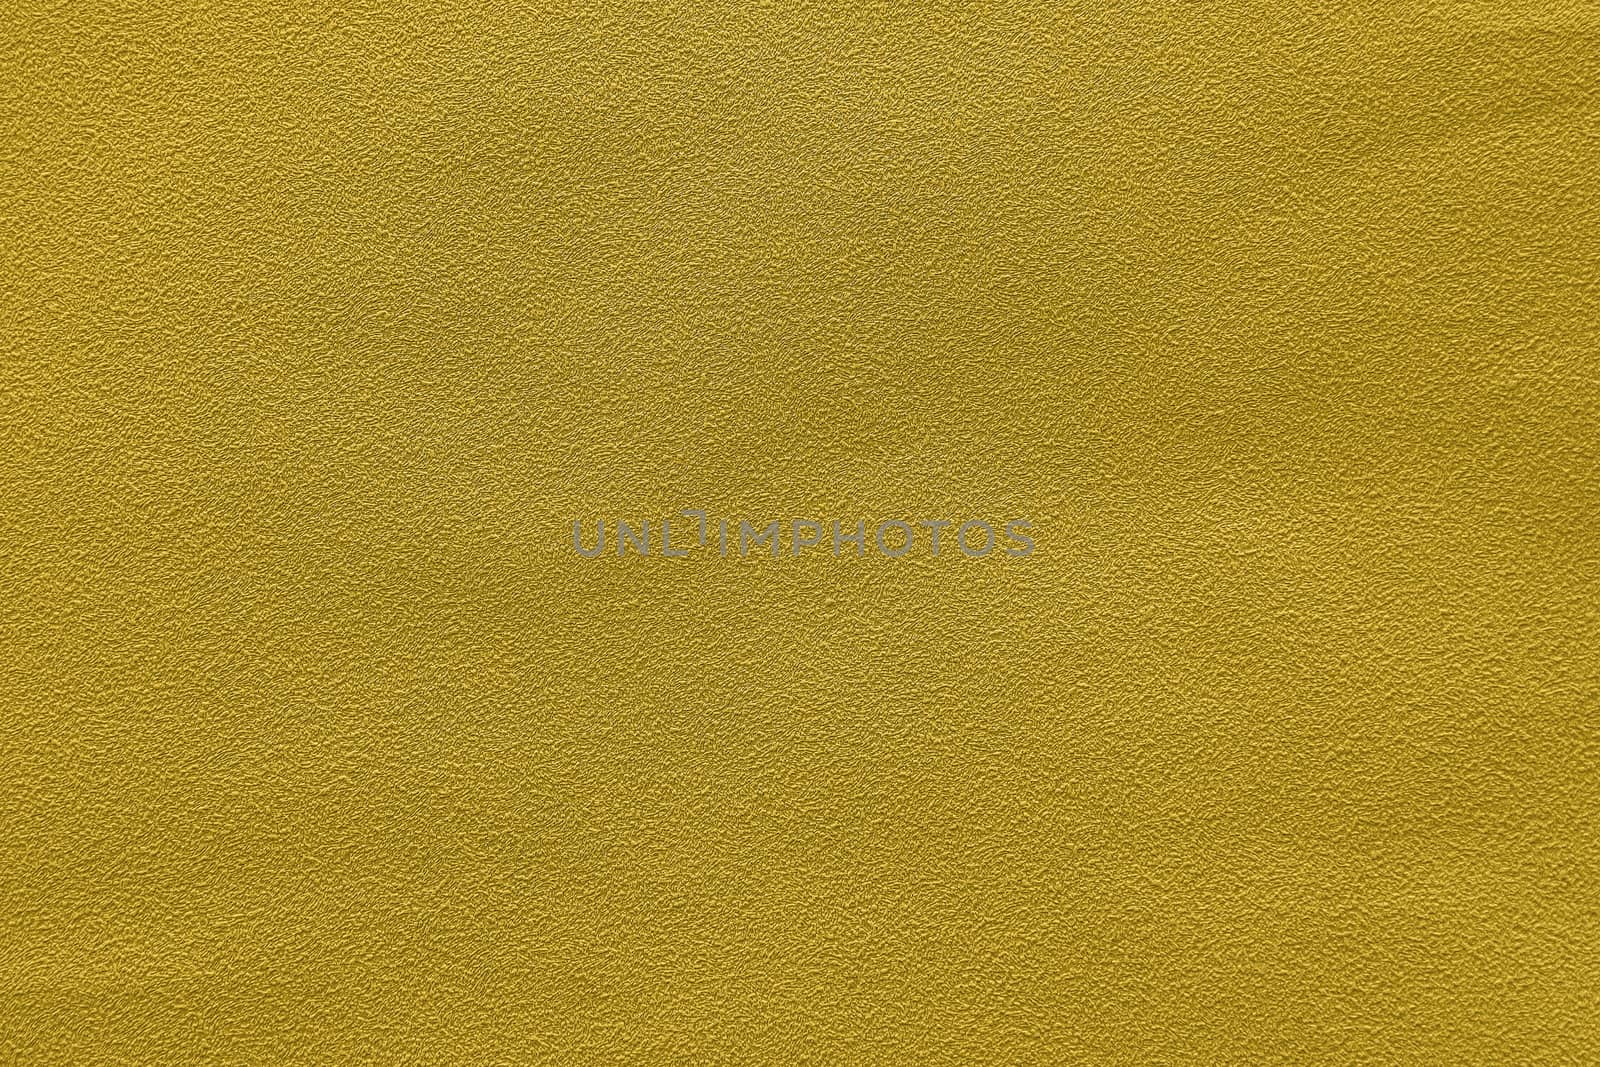 Abstract grungy decorative texture. Textured paper with copy space. The mottled surface of mustard yellow paper, texture closeup.